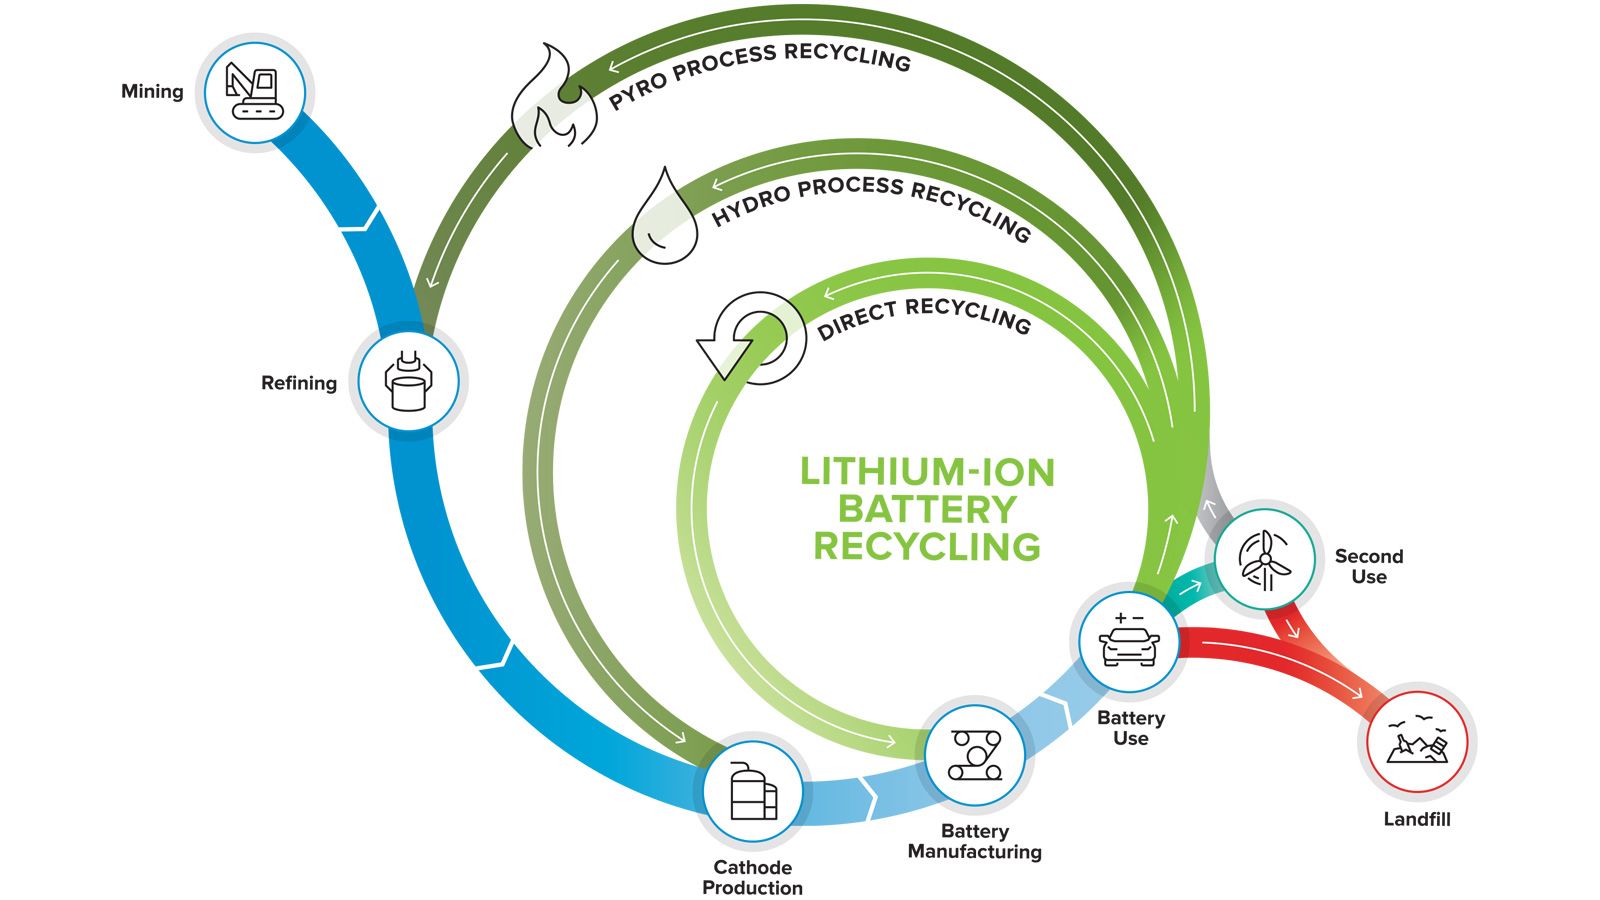 ReCell_Lithium-Ion-Battery-Lifecycle-Infographic_web_1600x900_R3_1.jpg